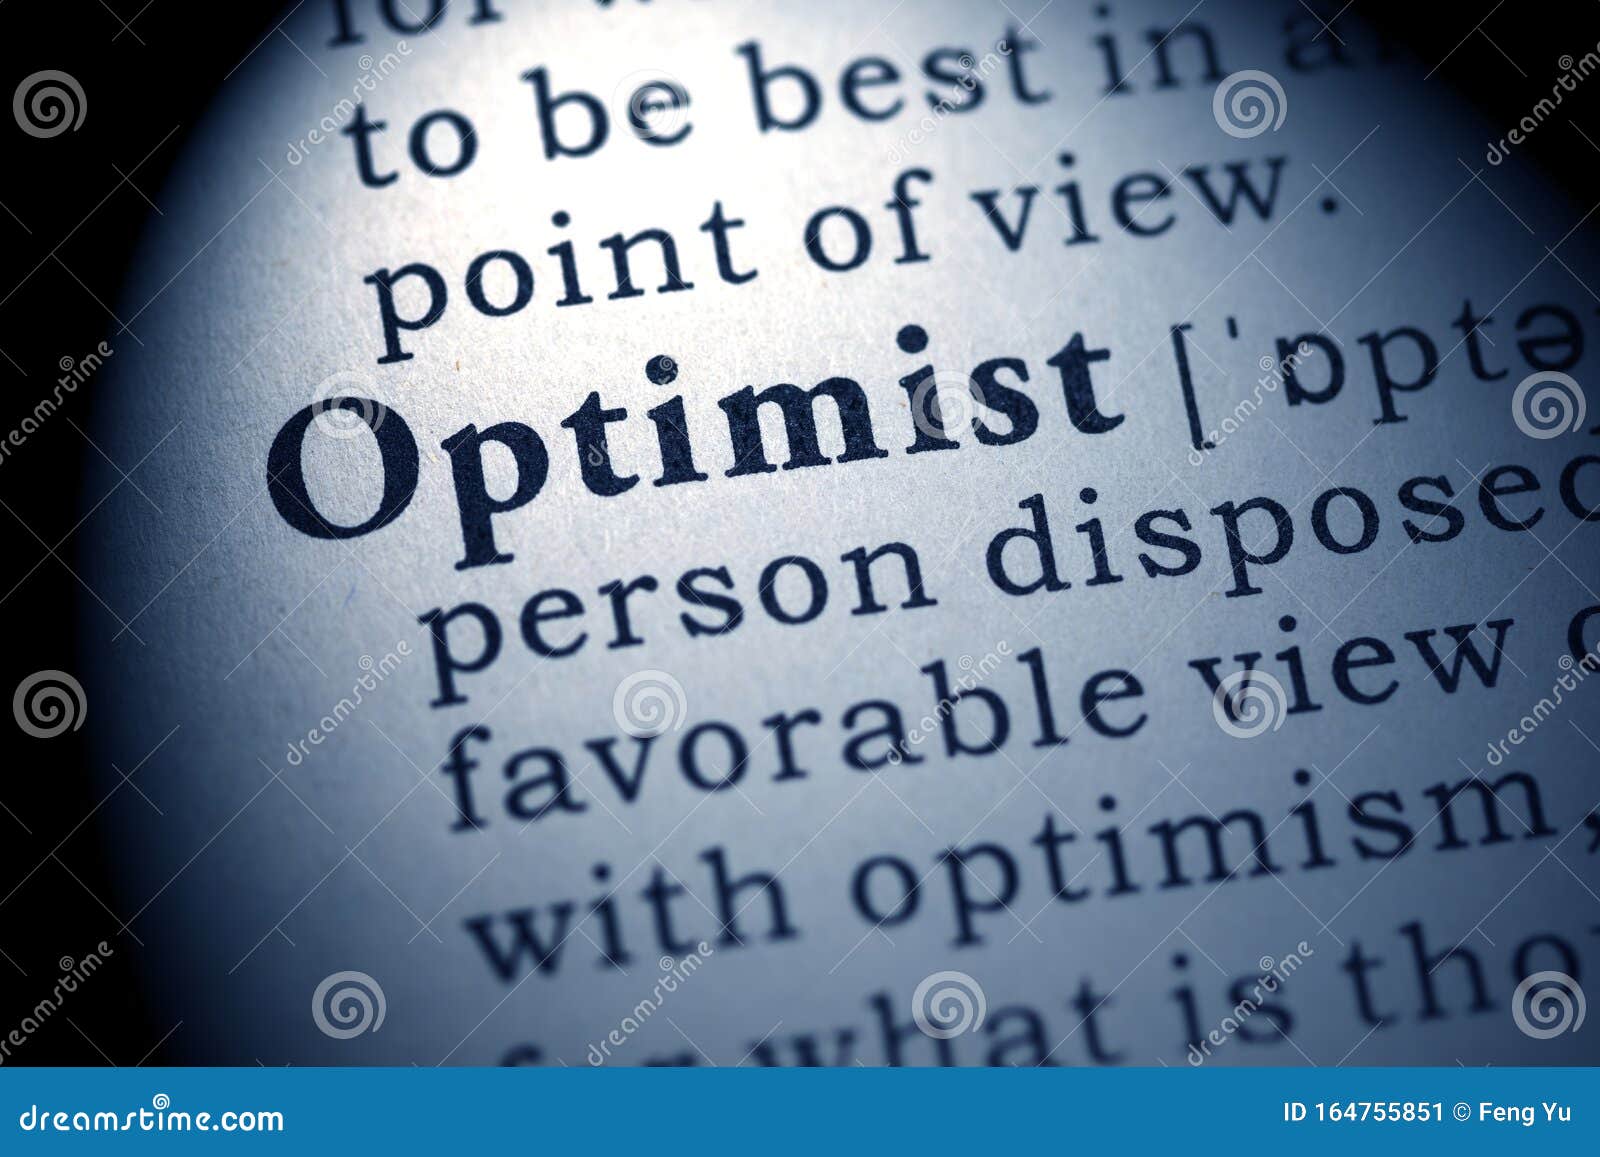 definition of the word optimist